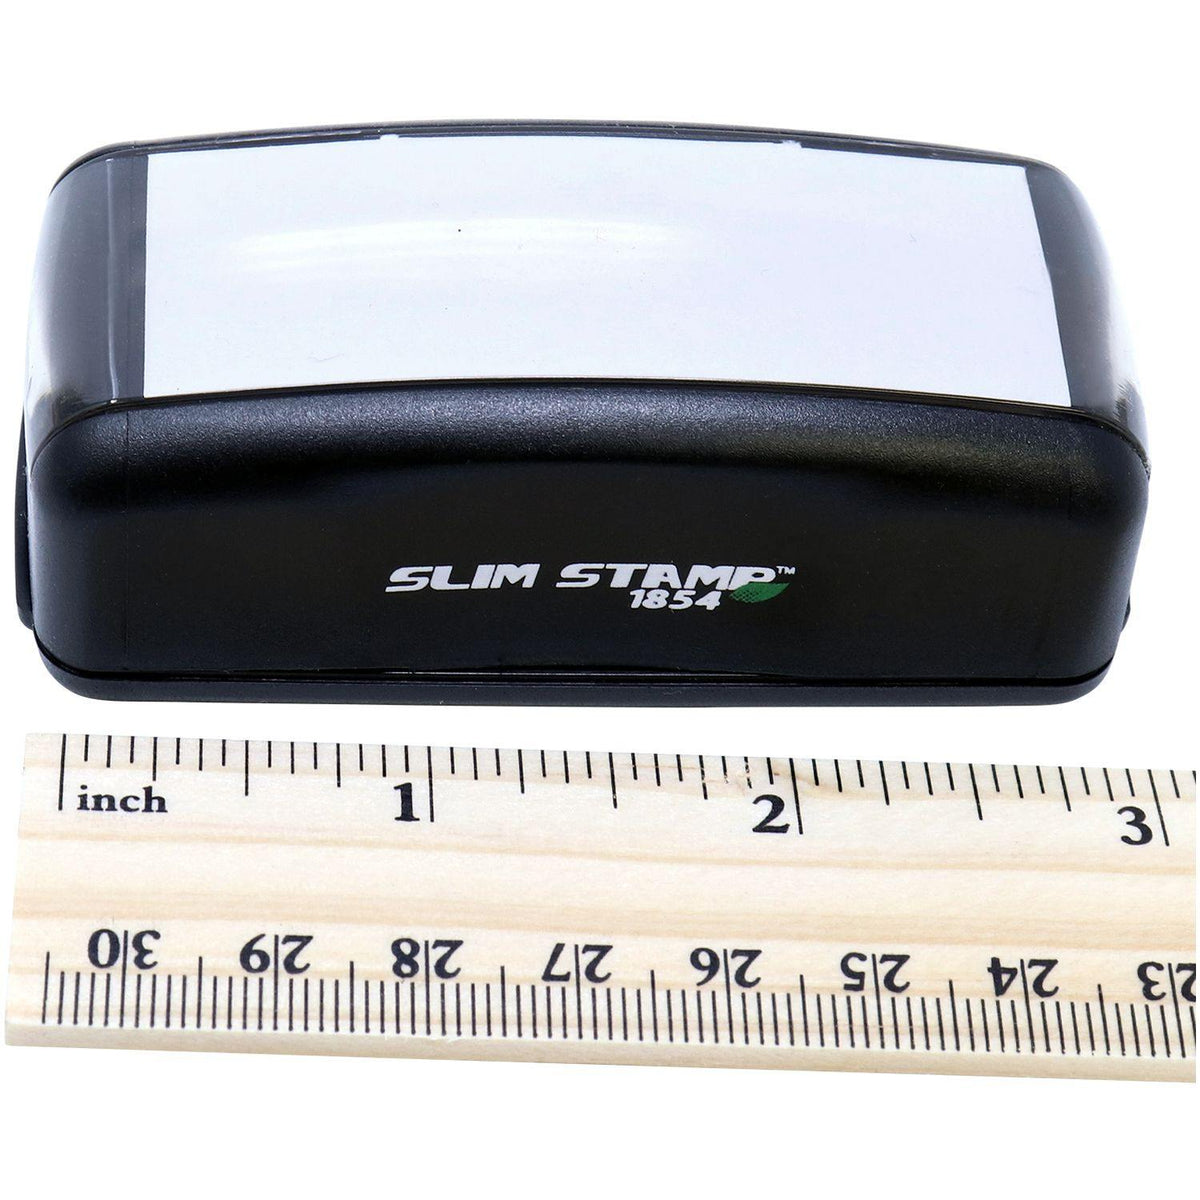 Measurement Large Pre Inked Petitioner Stamp with Ruler